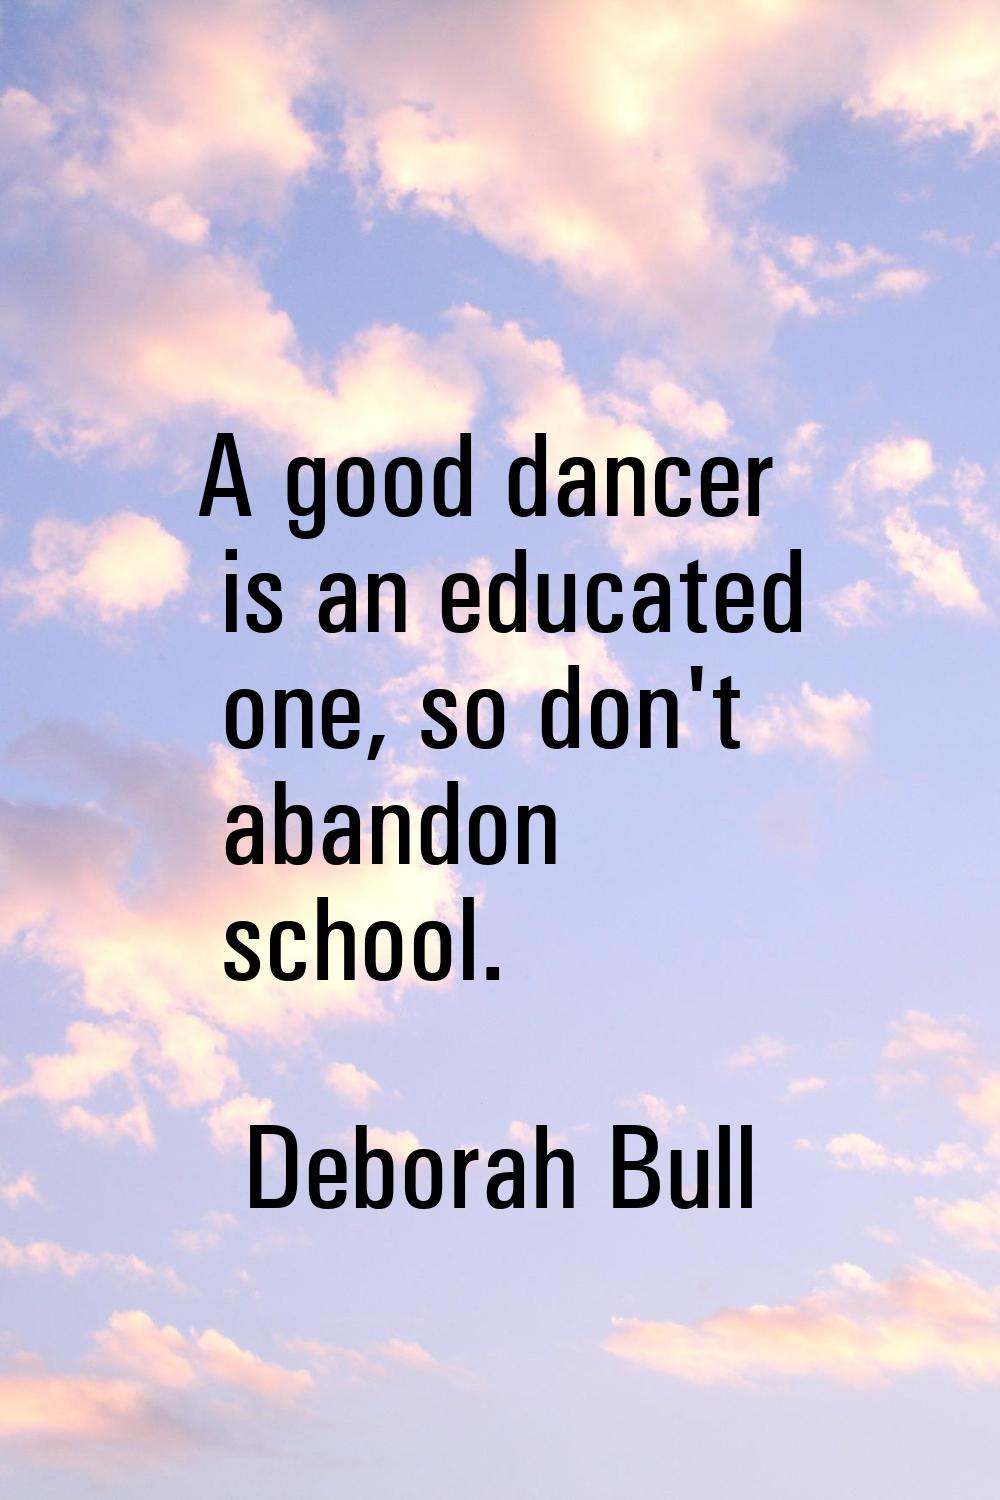 A good dancer is an educated one, so don't abandon school.